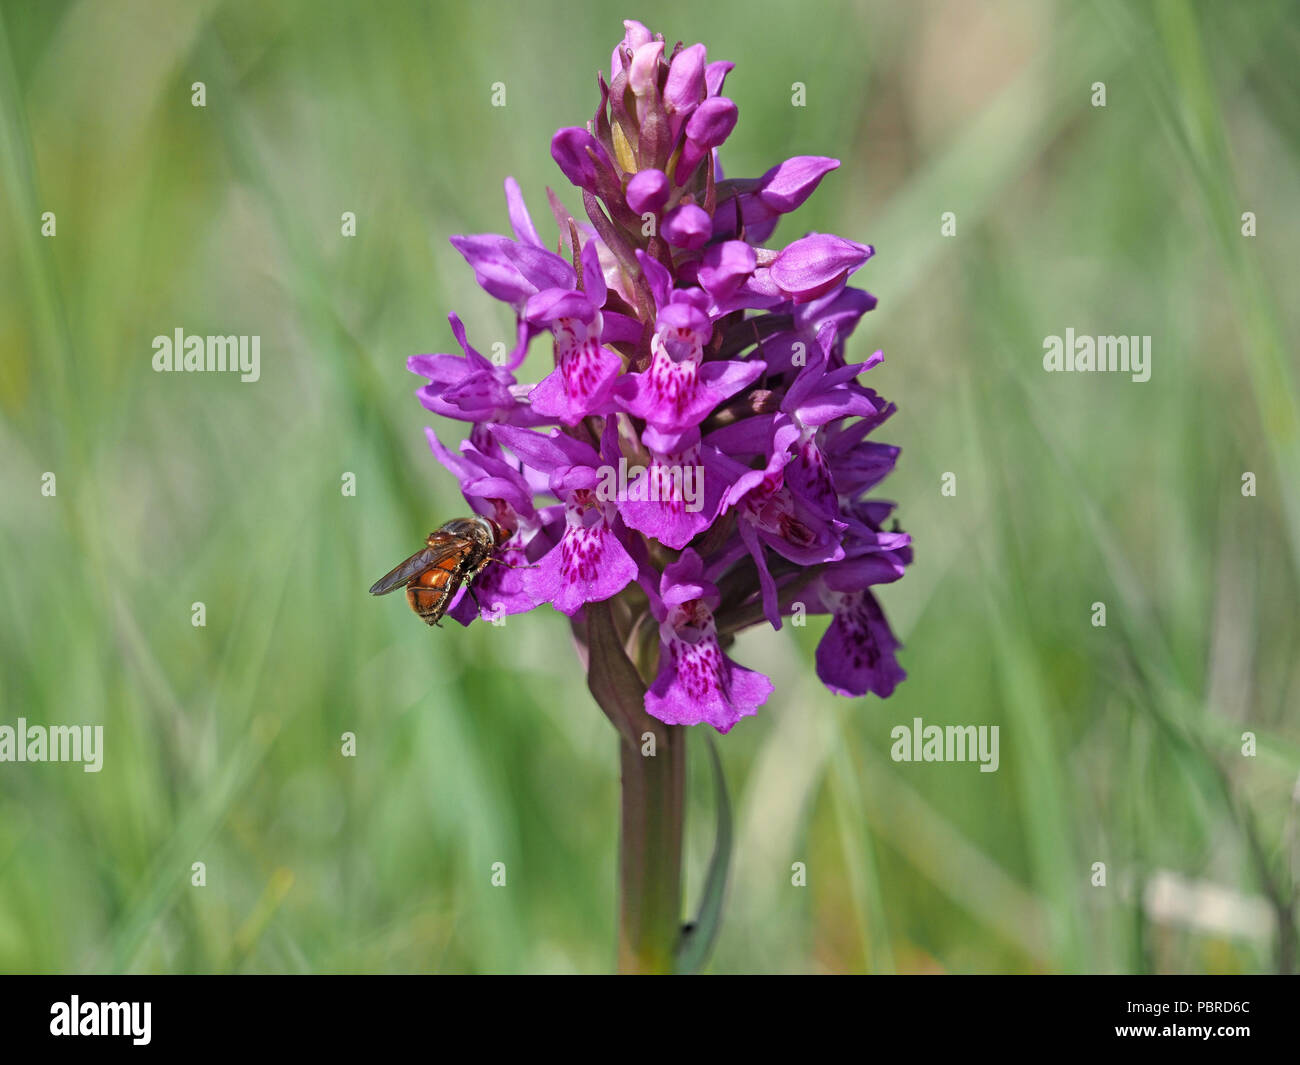 Rhyngia Campestris, Common Snout Hoverfly with prominent snout on Northern Marsh Orchid (Dactylorhiza purpurella) in Cumbria, England, UK Stock Photo